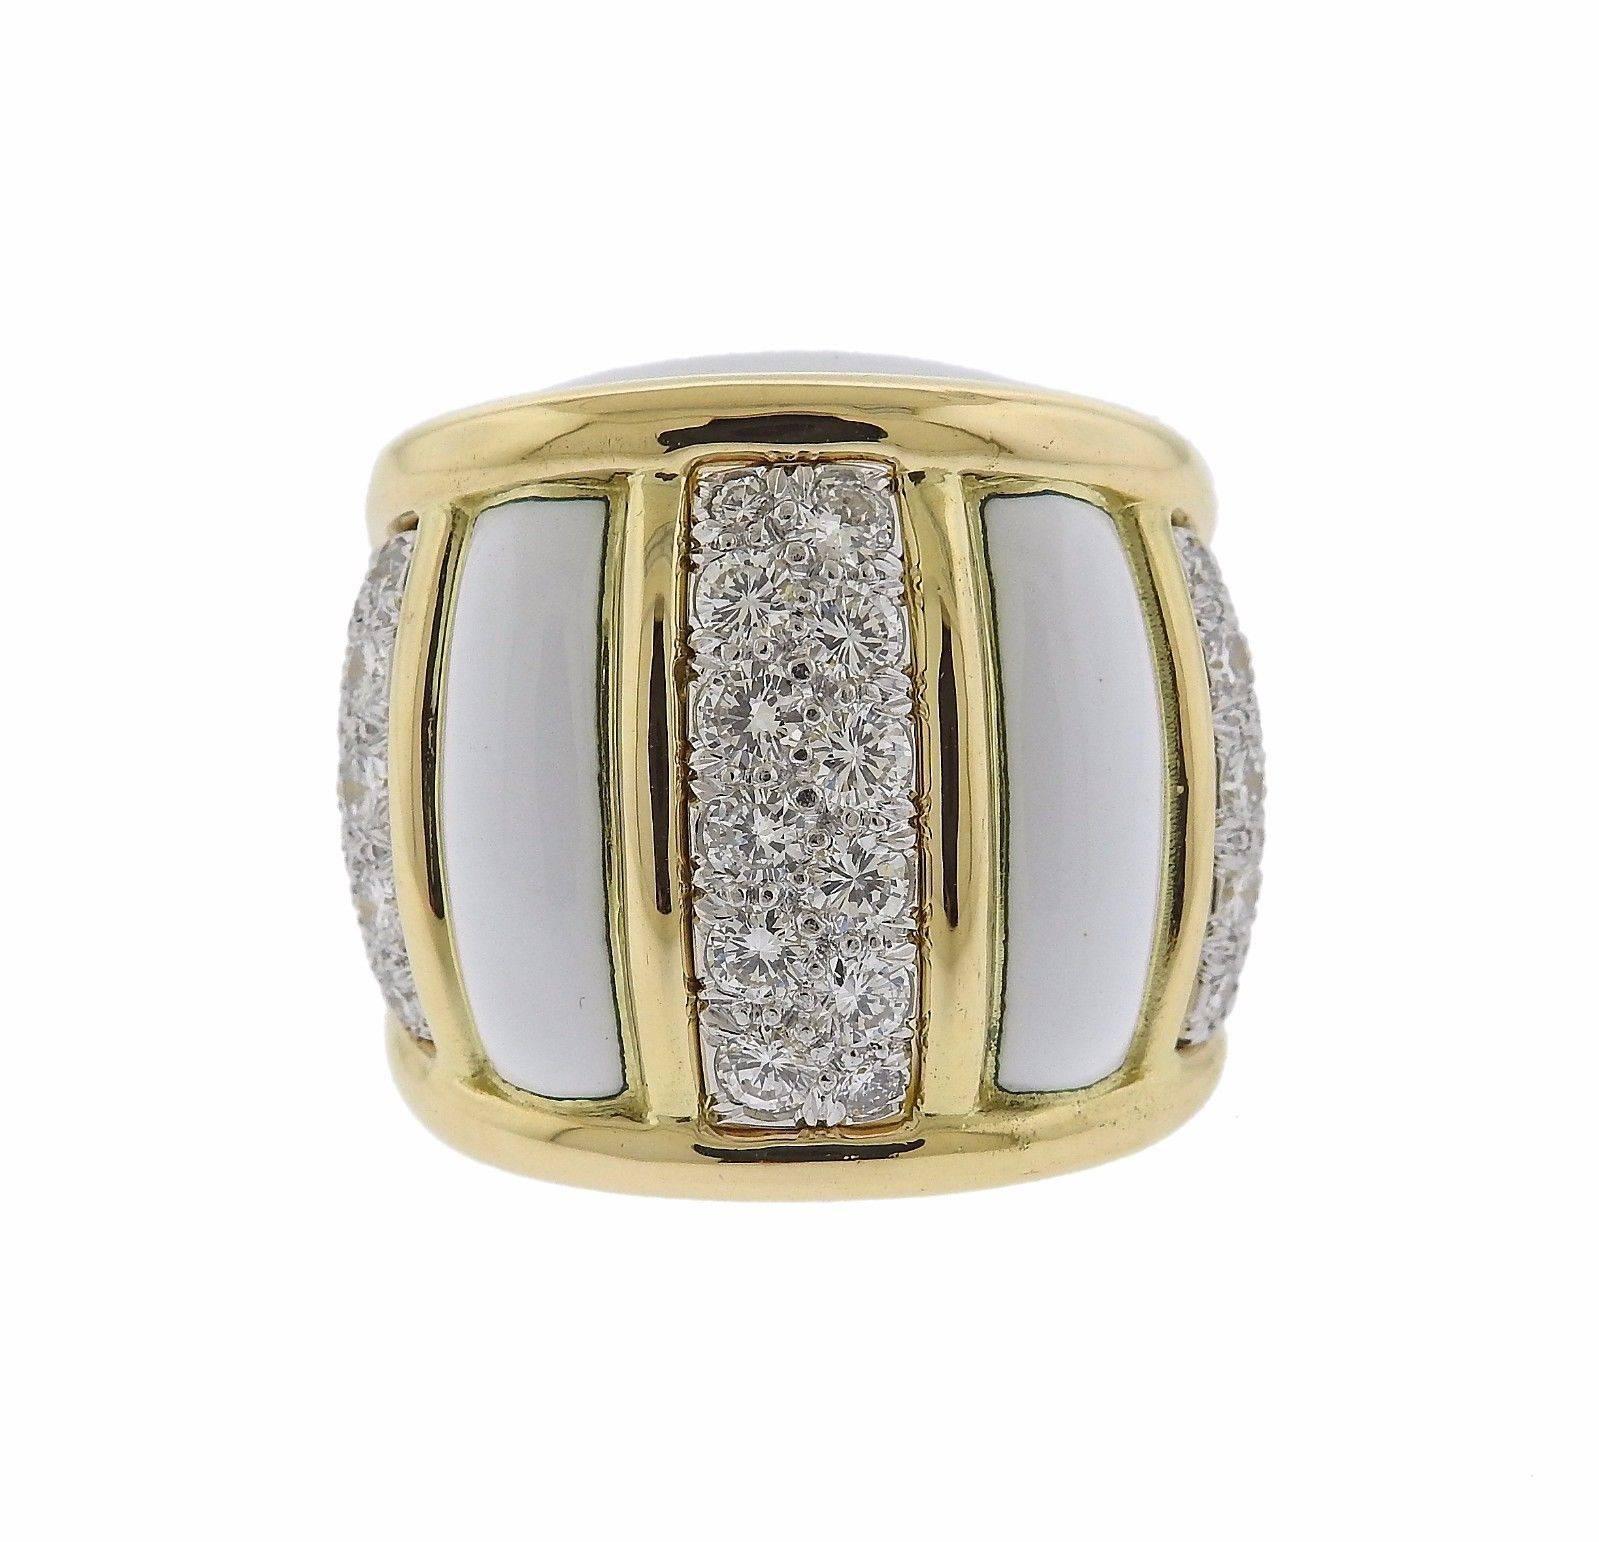 An 18k yellow gold and platinum ring adorned with white enamel and set with 2.40ctw of G/VS diamonds.  The ring is a size 6 and the top measures 23mm x 25mm.  The weight of the ring is 29.2 grams. Marked: plat, 18k, Webb.